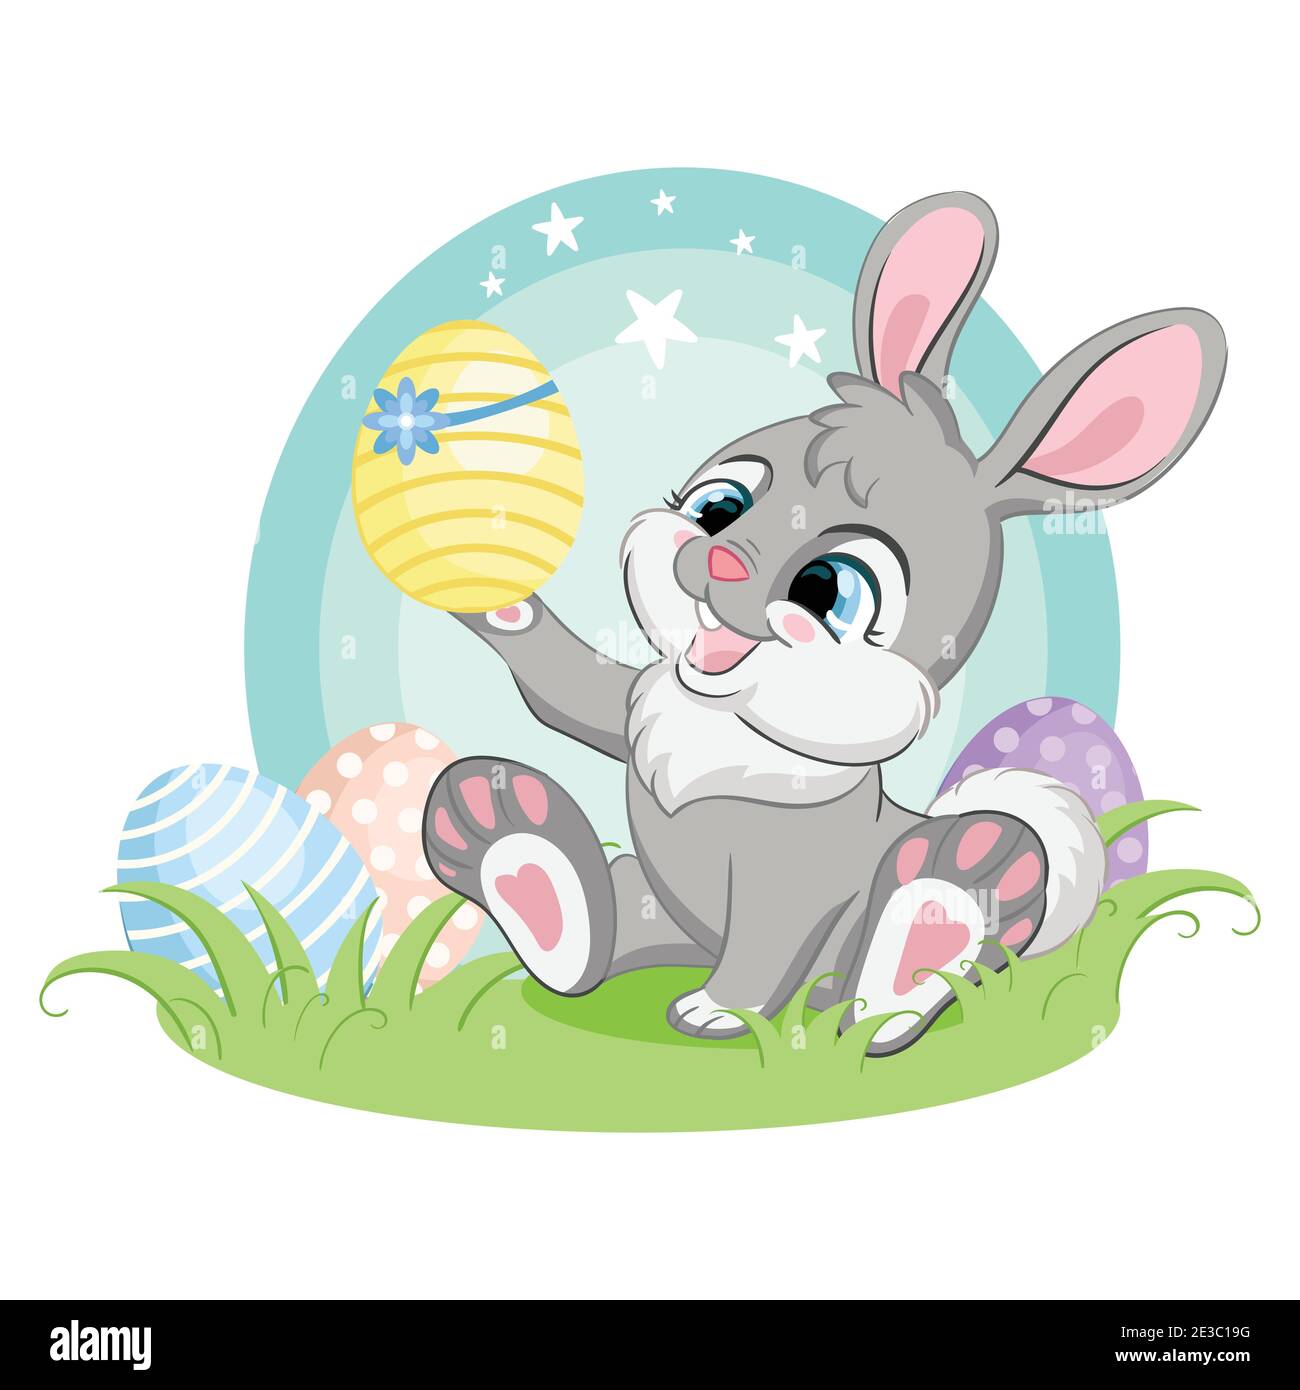 Cute gray bunny character admiring the Easter egg. Colorful illustration isolated on white background. Cartoon character rabbit easter concept for pri Stock Vector